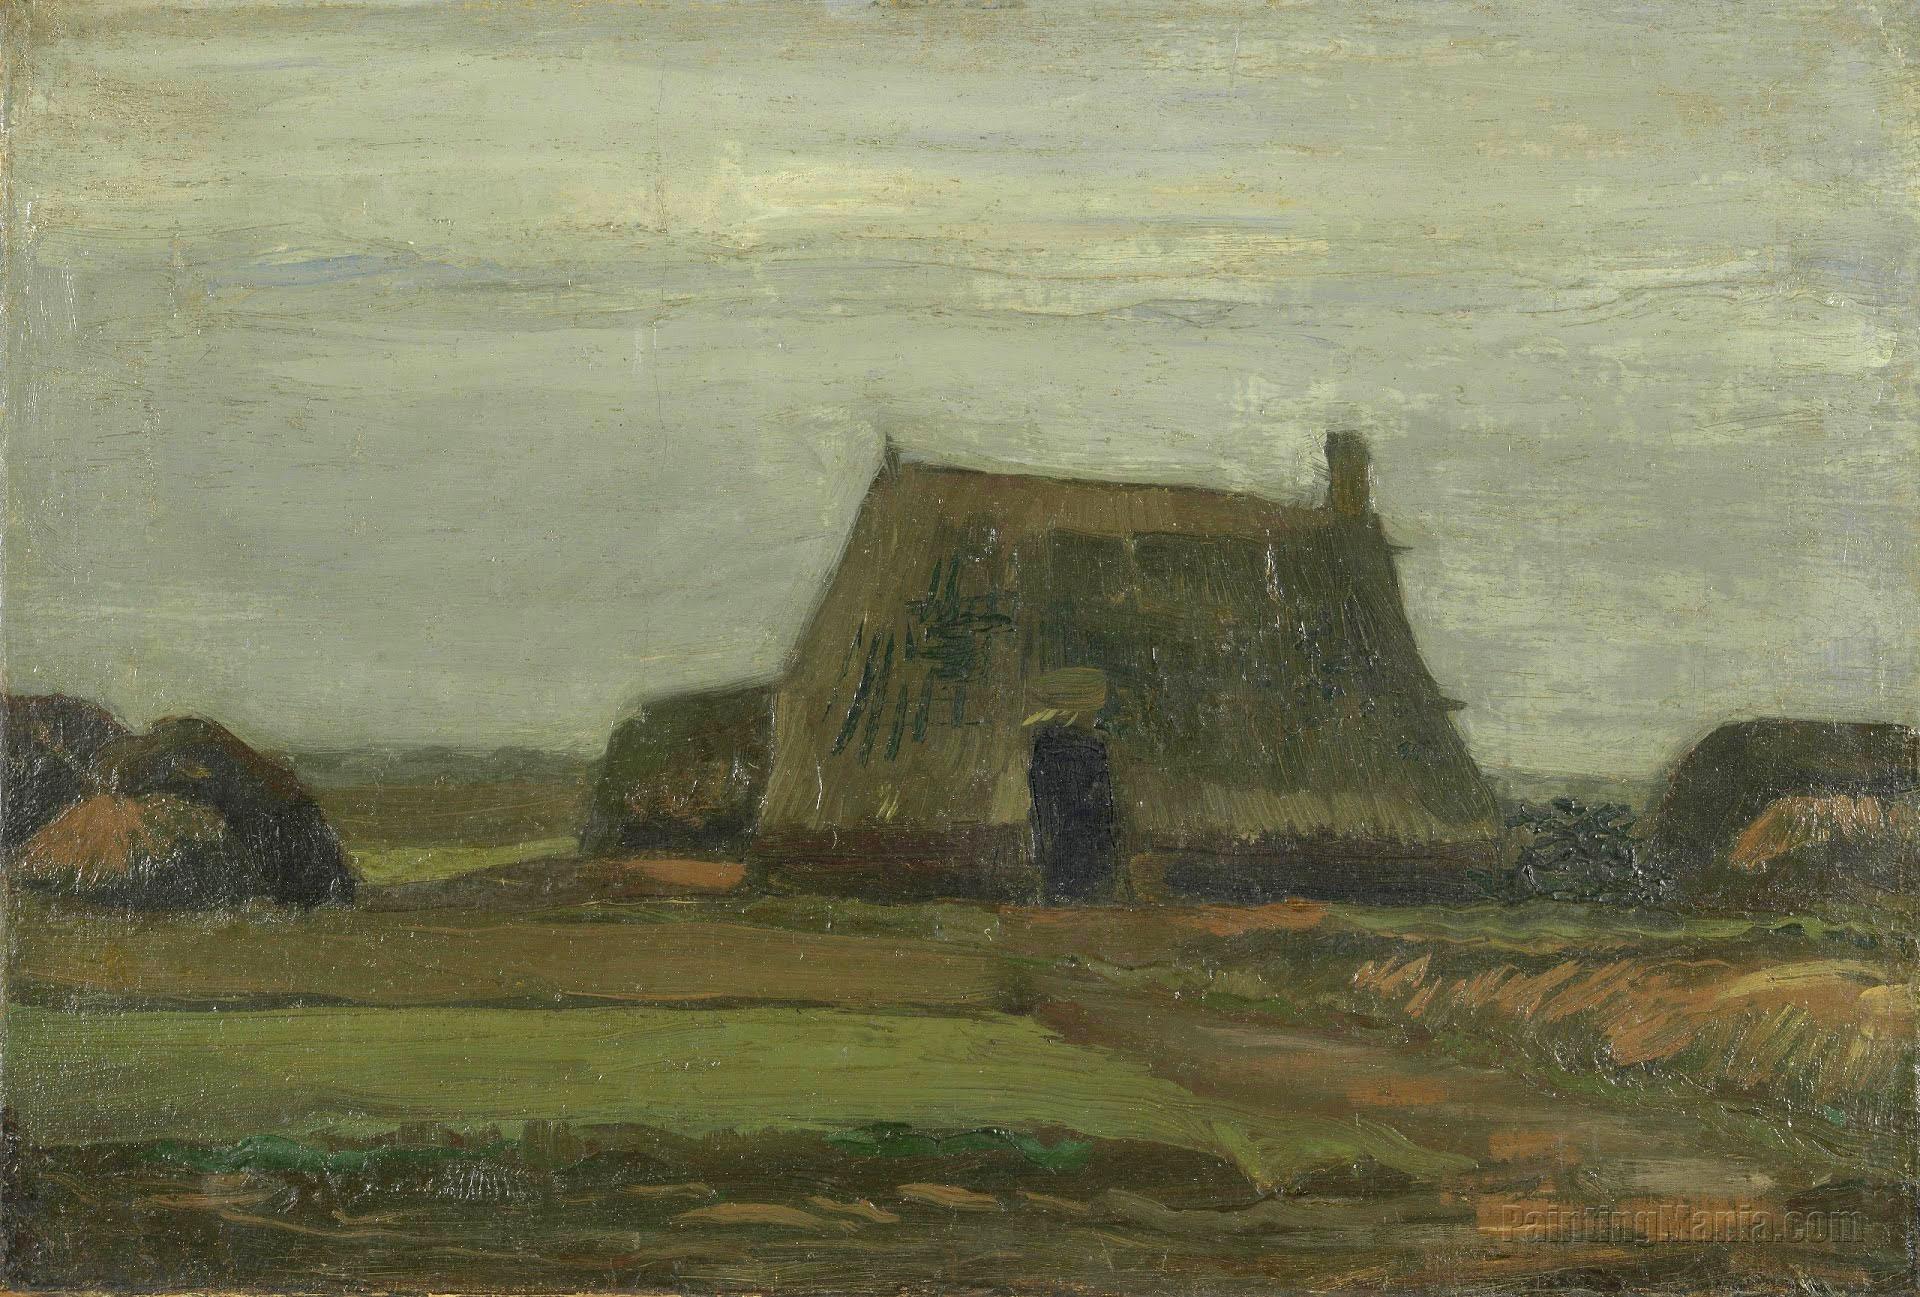 Farmhouse with Peat Stacks